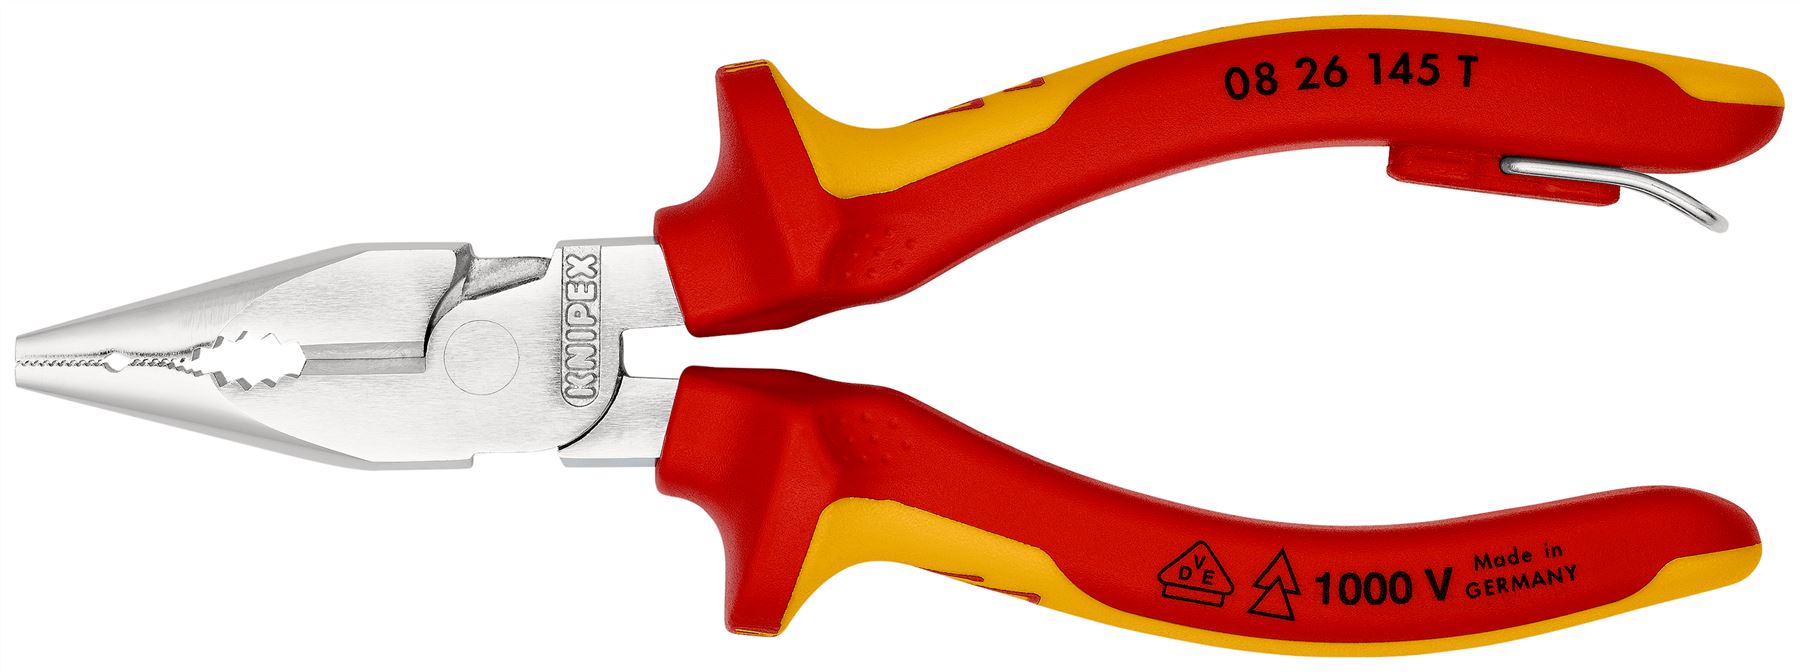 Knipex Needle Nose Combination Pliers 145mm VDE Insulated 1000V with Tether Point 08 26 145 T